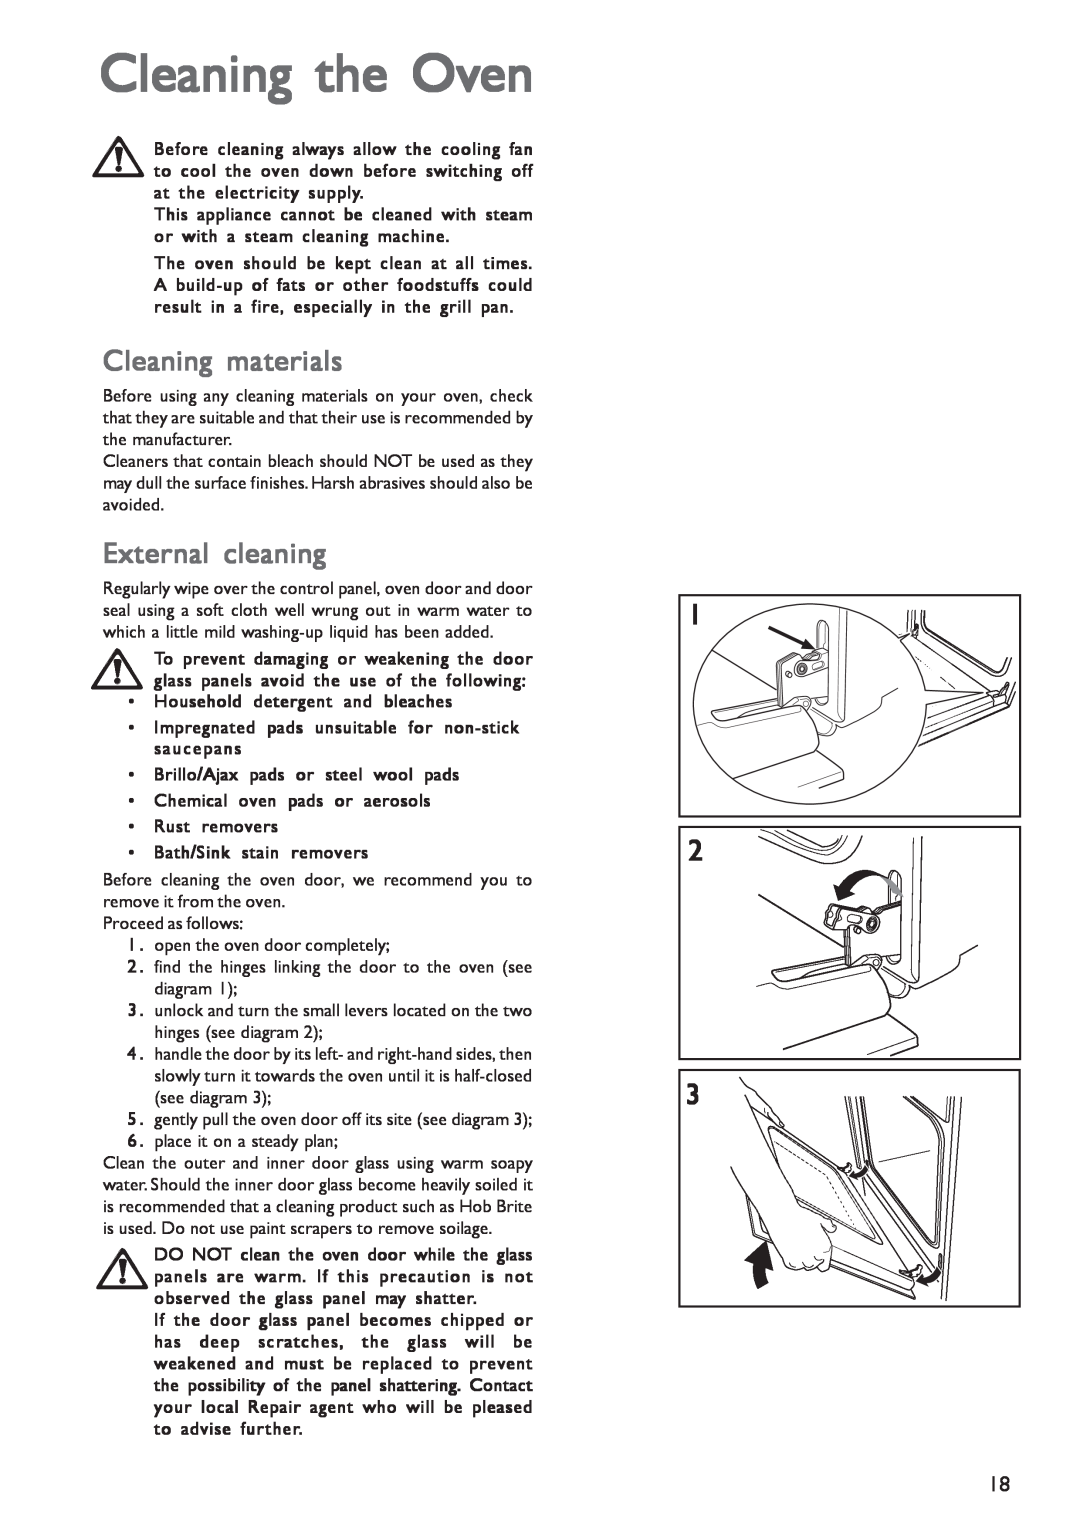 John Lewis JLBIOS601 instruction manual Cleaning the Oven, Cleaning materials, External cleaning 